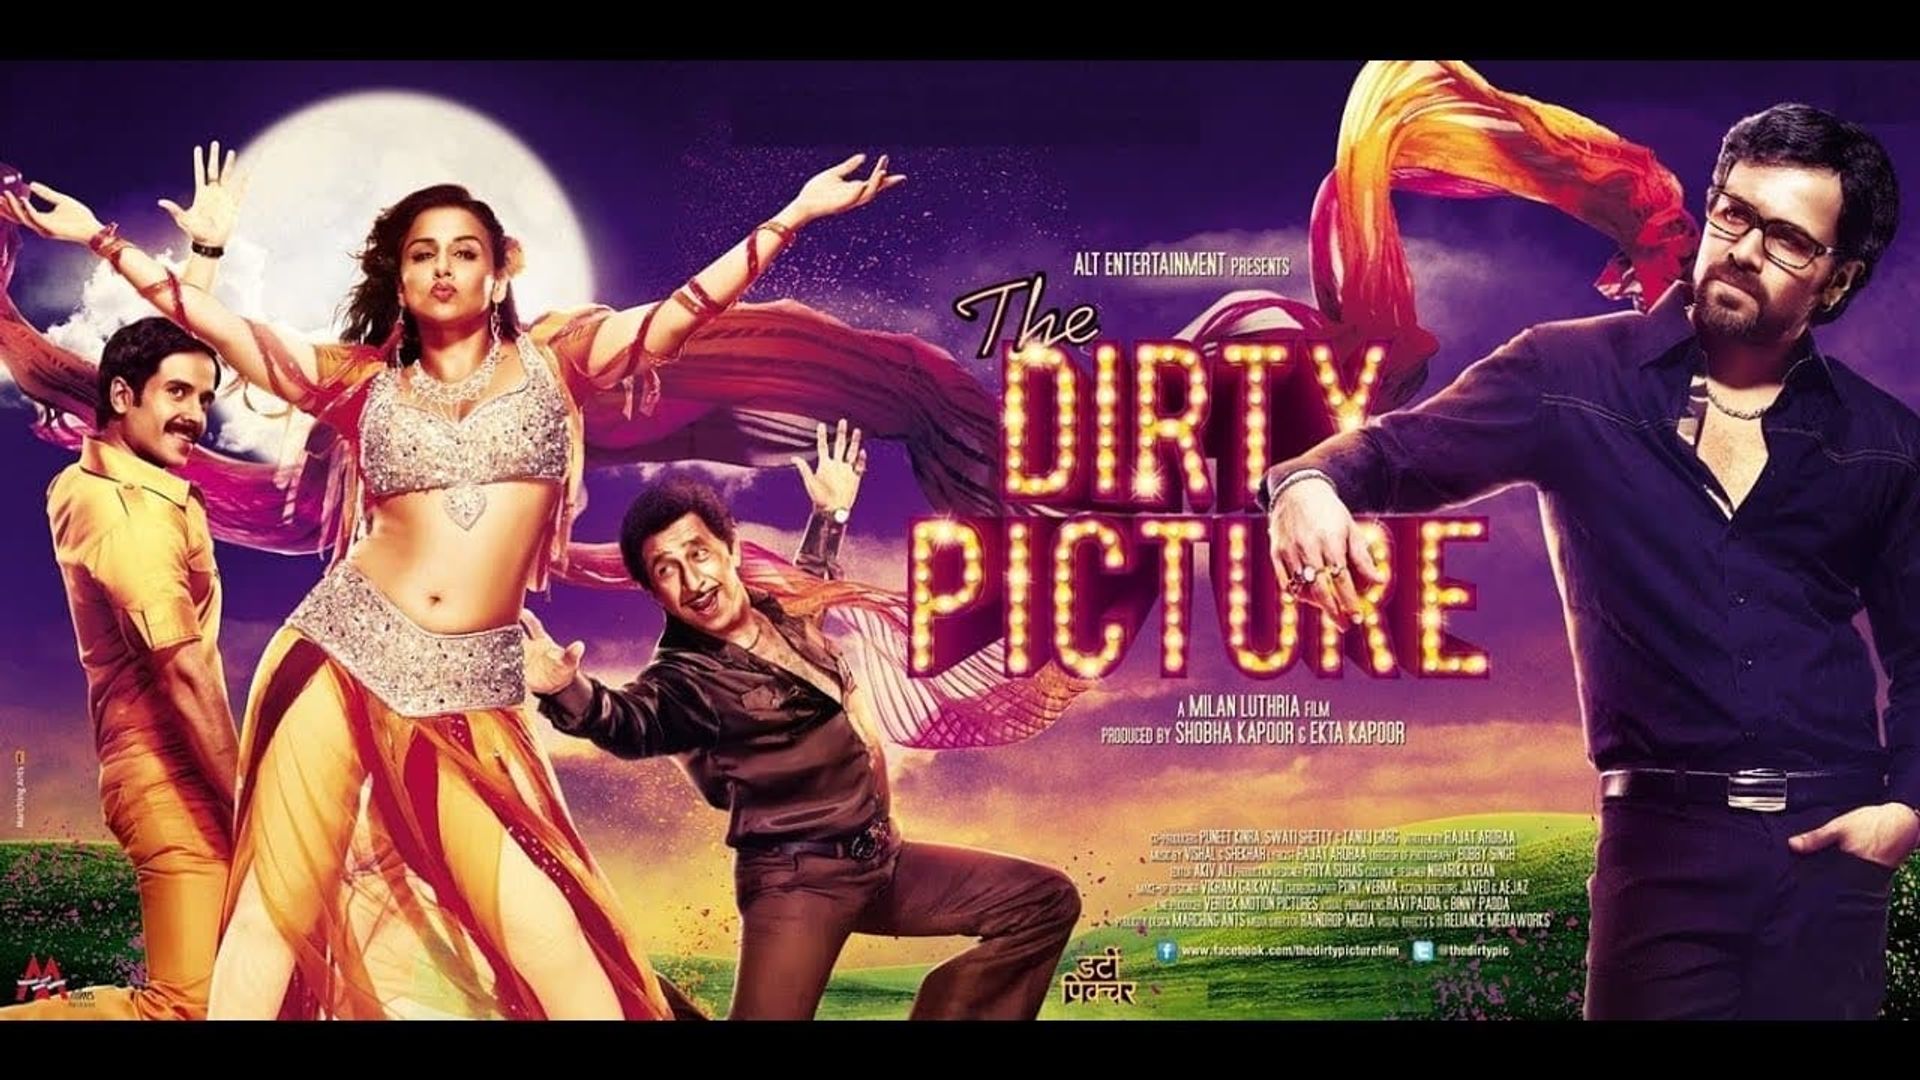 The Dirty Picture background